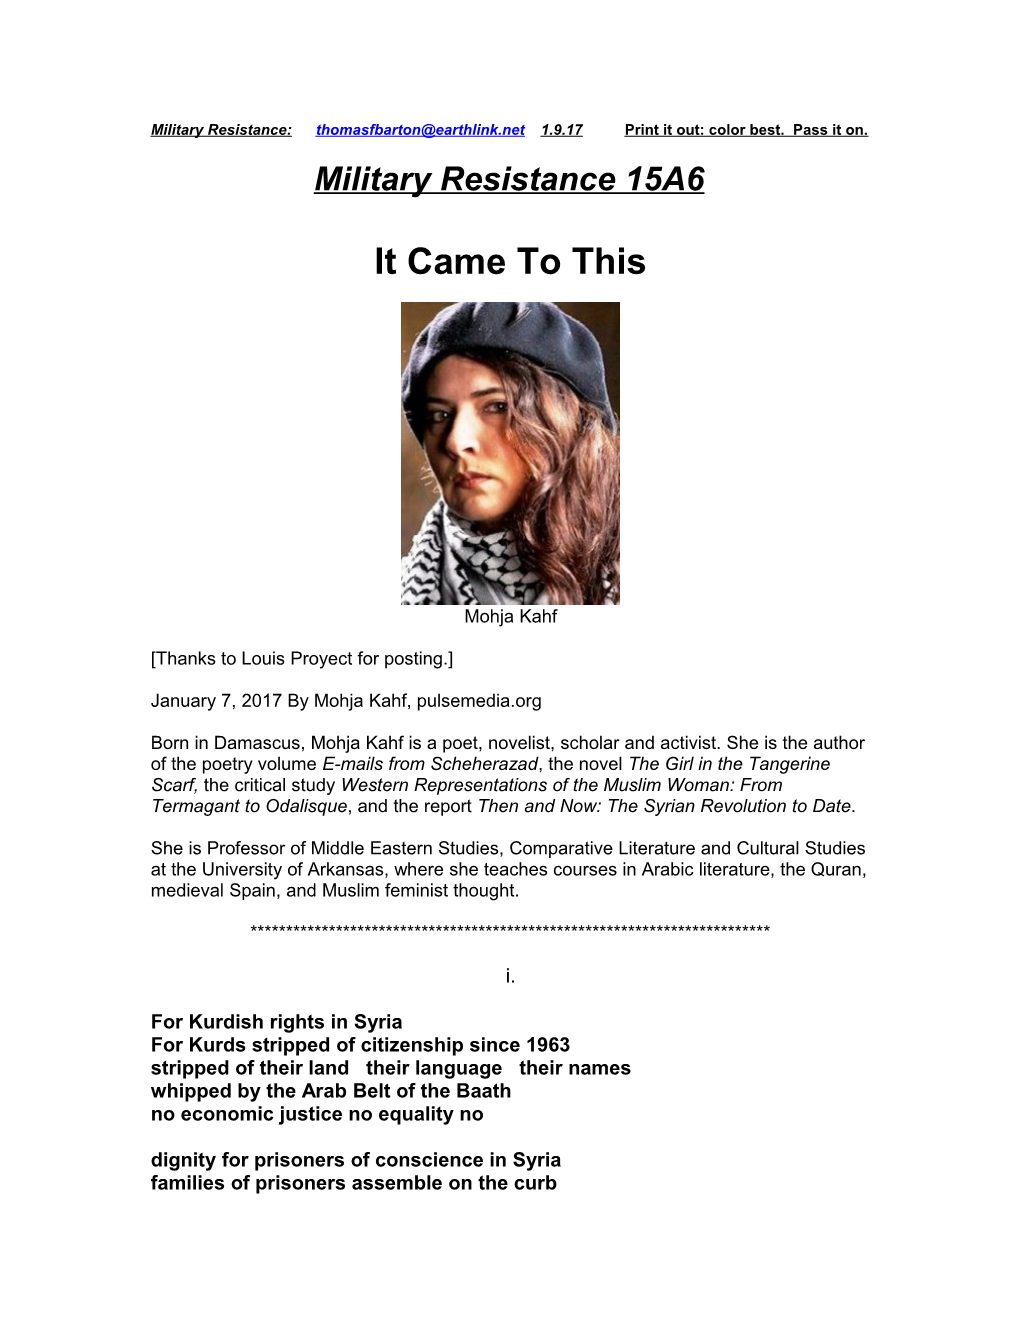 Military Resistance 15A6